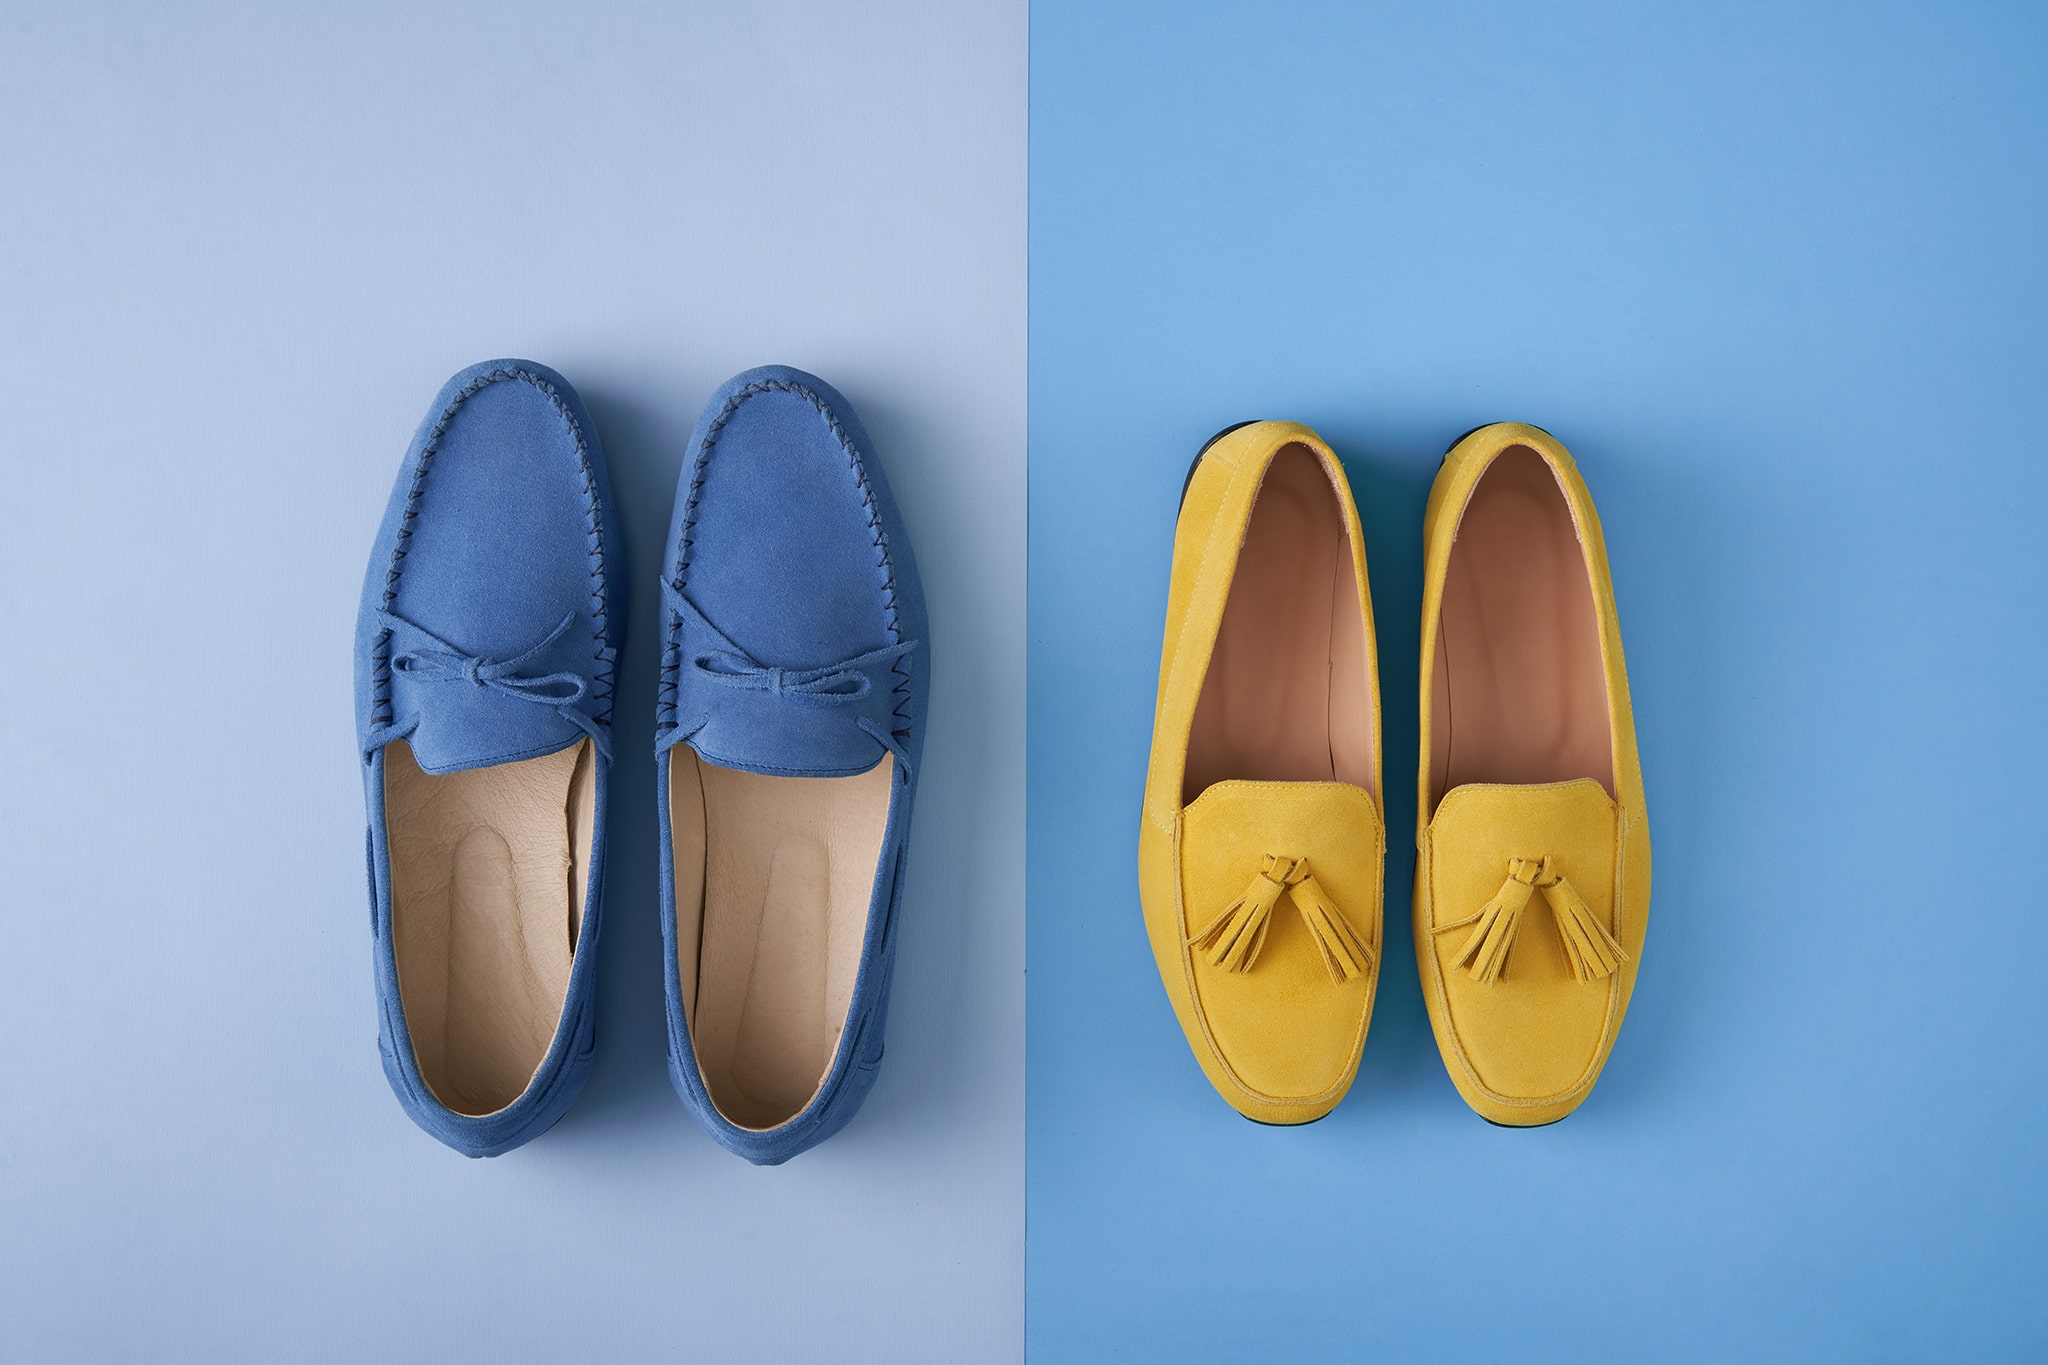 Moccasins are usually made of one piece of soft leather, stitched together at the top, creating a gathered seam